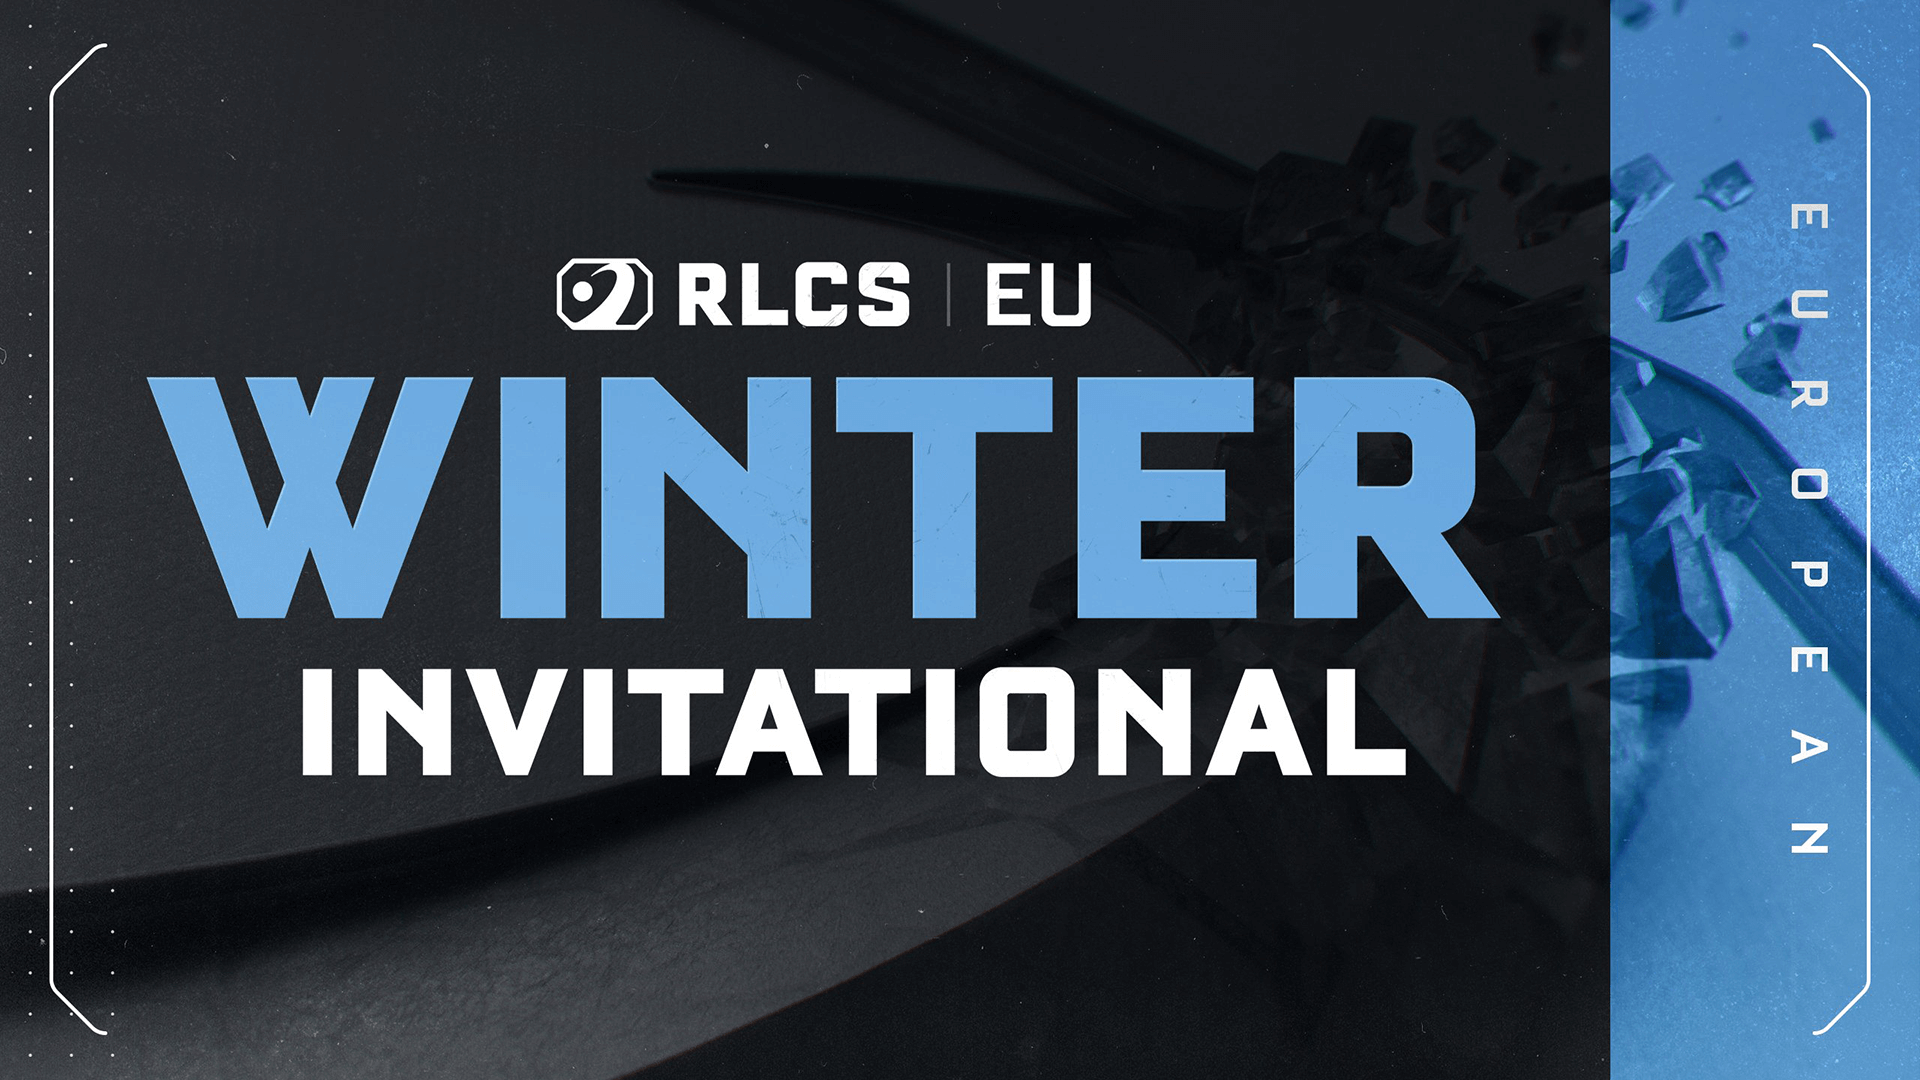 Rocket league: The best moments from EU Winter Invitational